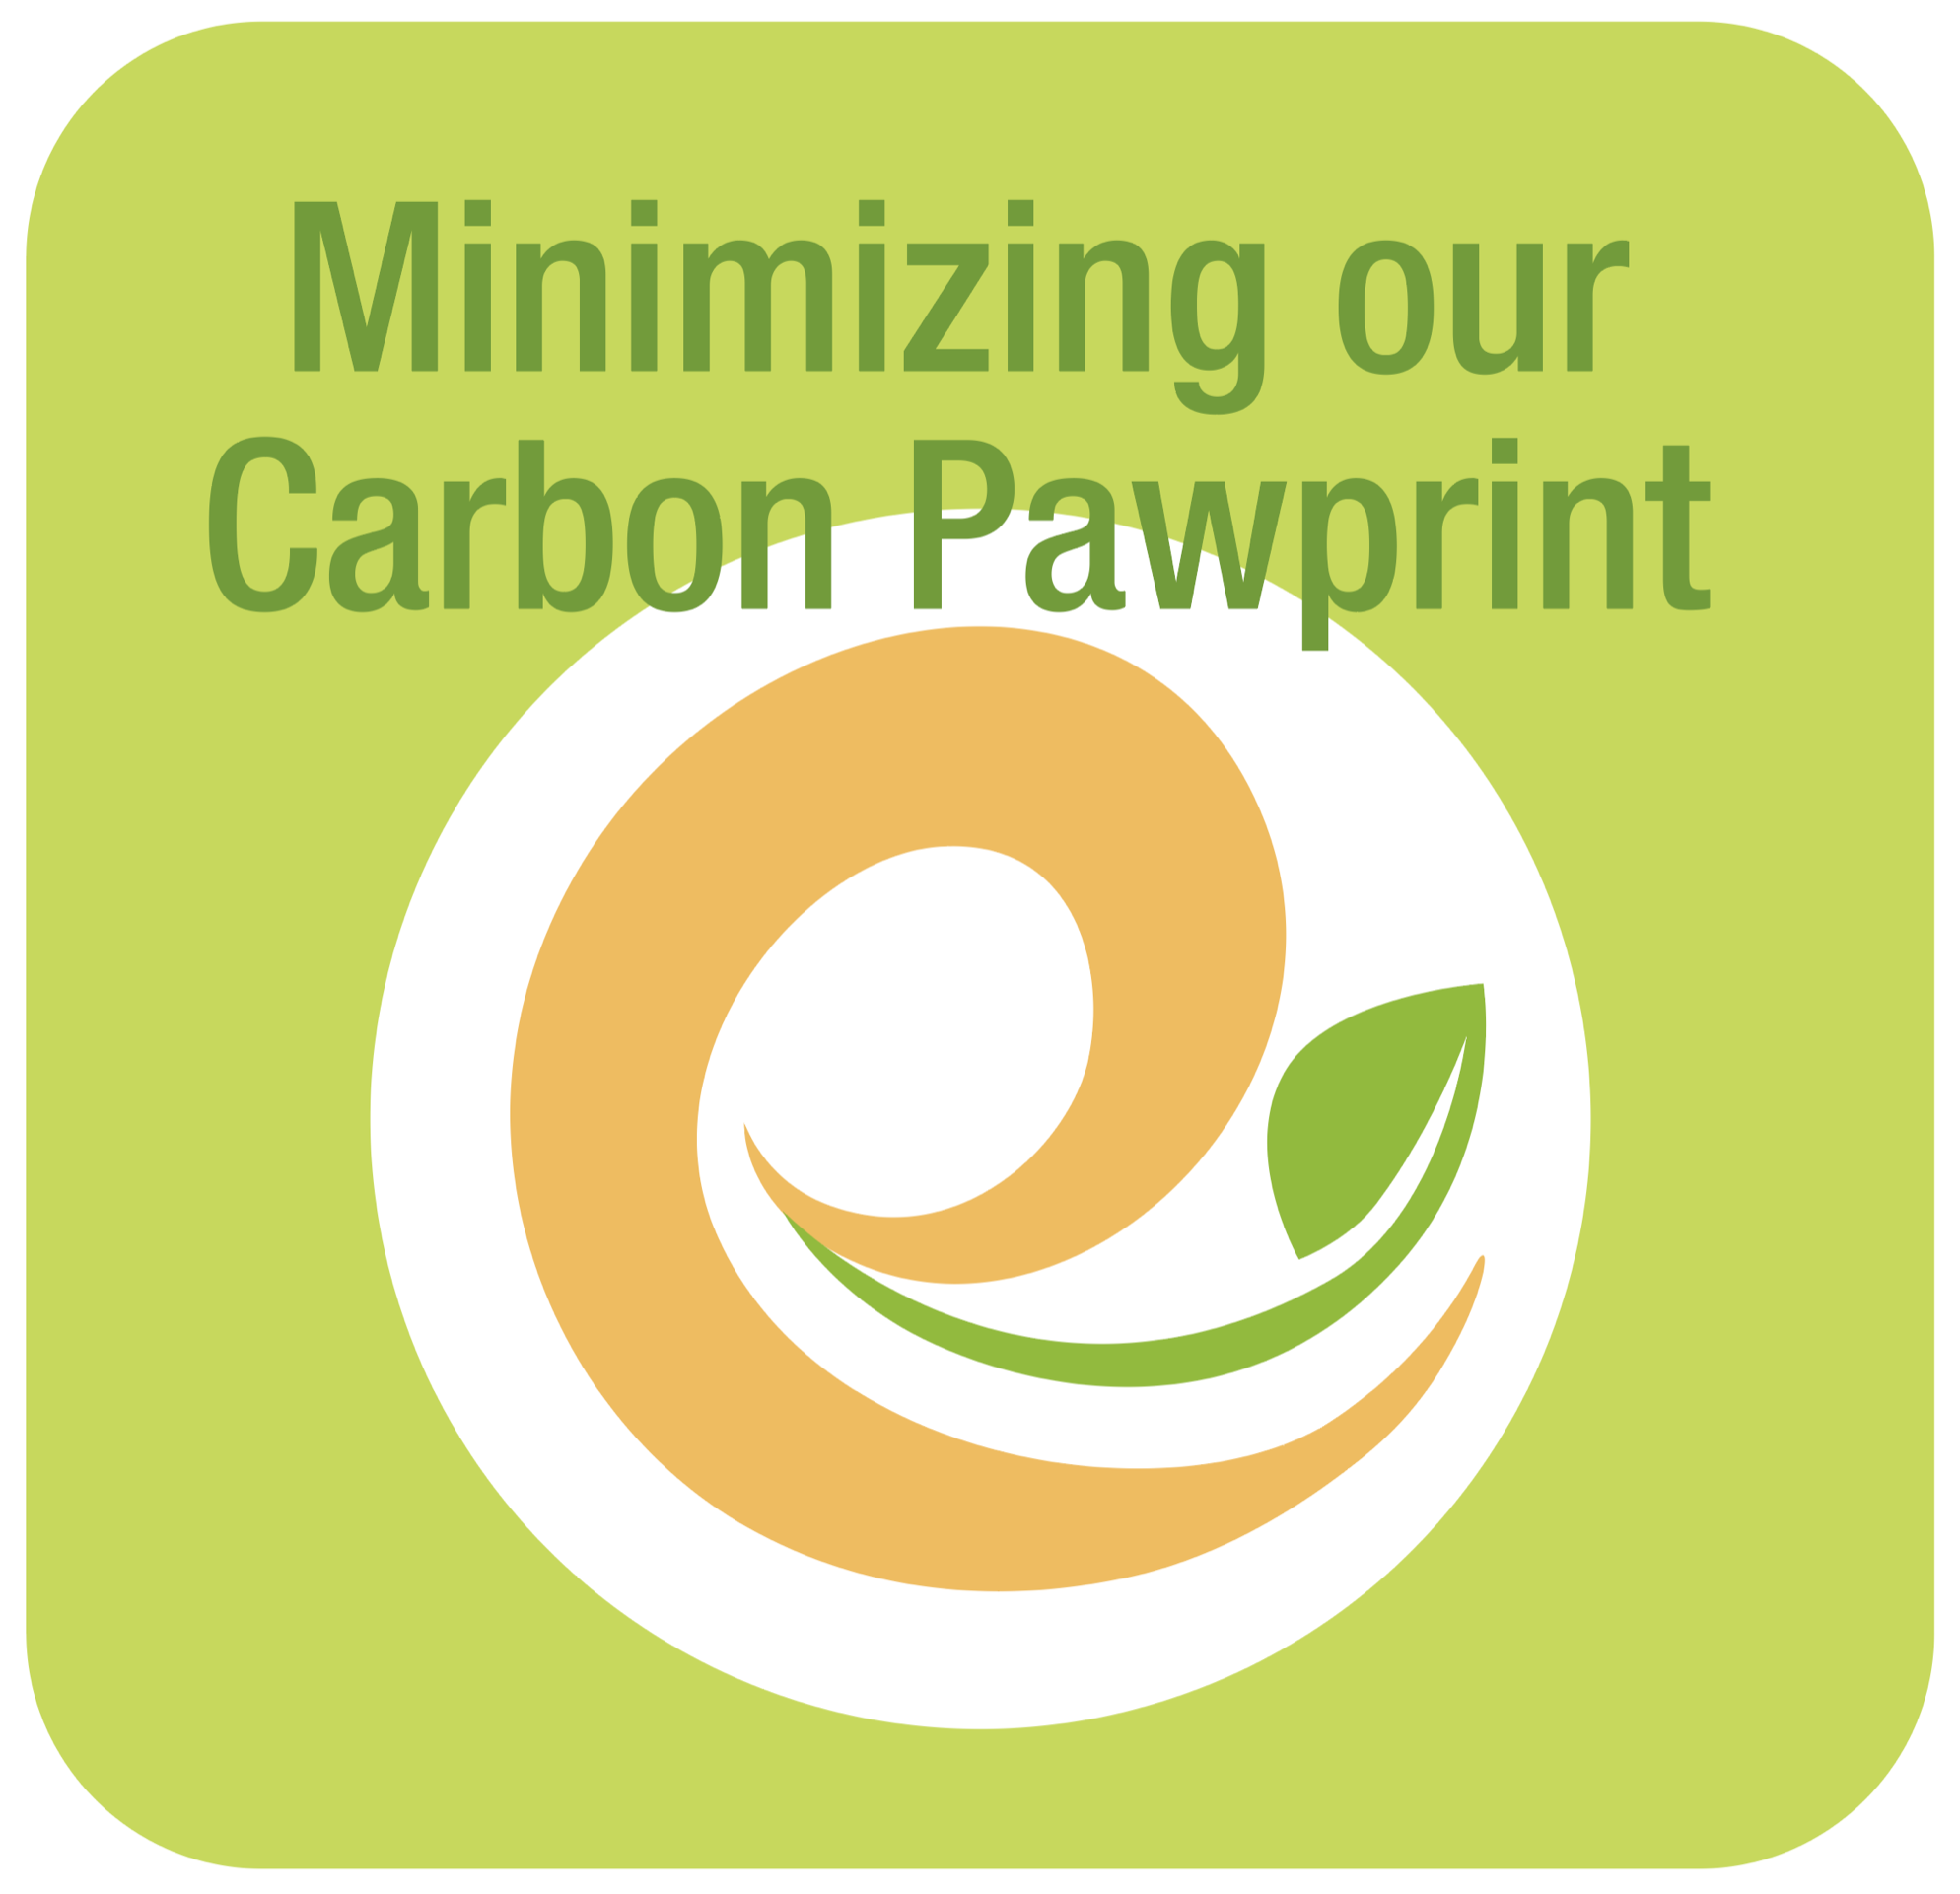 🌿 Earth-Friendly Pet Parenting: A Guide for a Greener Pawprint 🌿